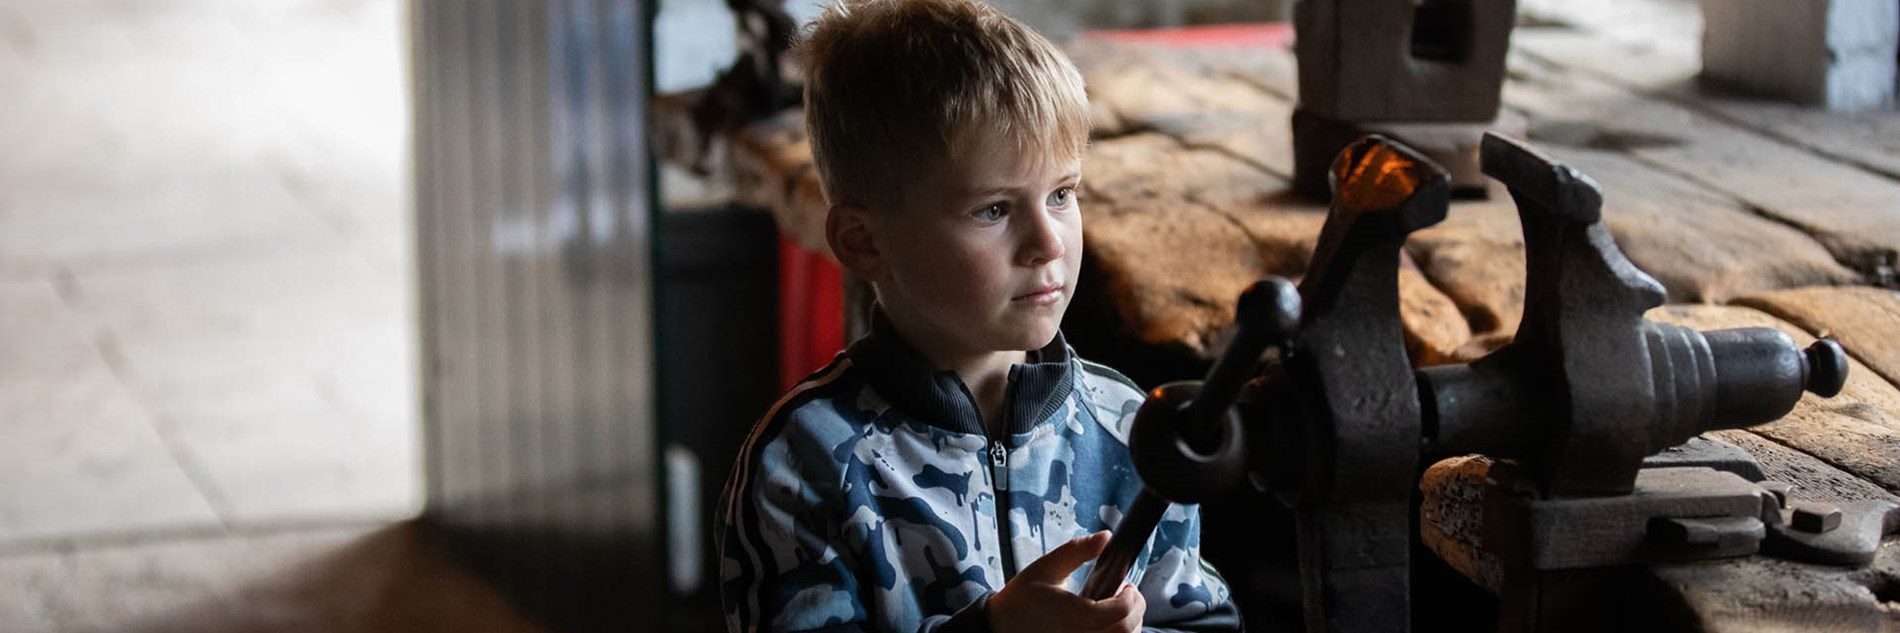 A child visitor looking intently at a large old vice mounted on a very worn workbench.